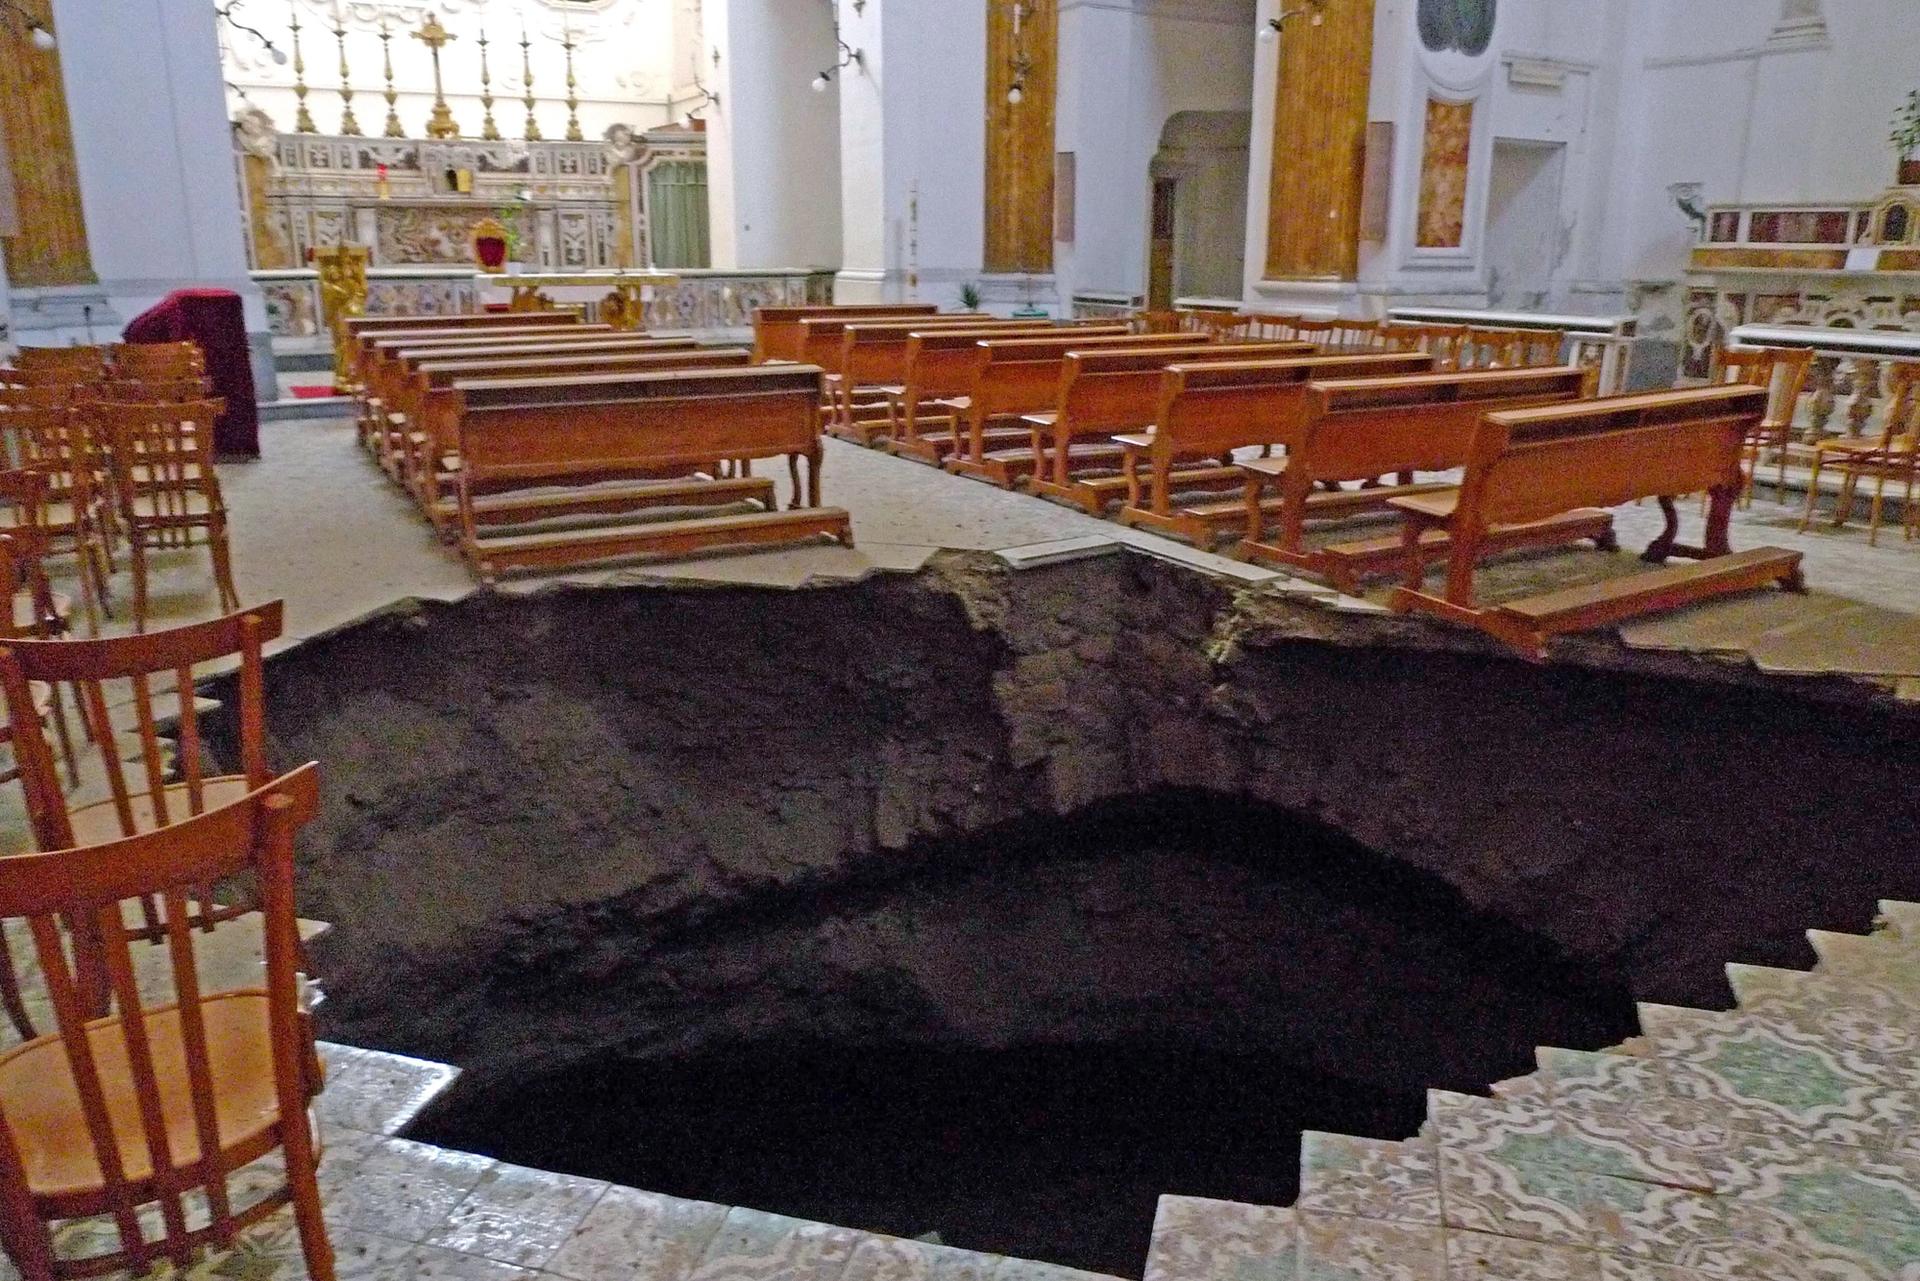 In September 2009, a sinkhole opened in the 17th century church of San Carlo alle Mortelle, known for its Baroque art, creating a pit more than five metres deep. The church reopened in 2017 after €1.5m worth of repairs Photo: Ciro Fusco/EPA/Shutterstock